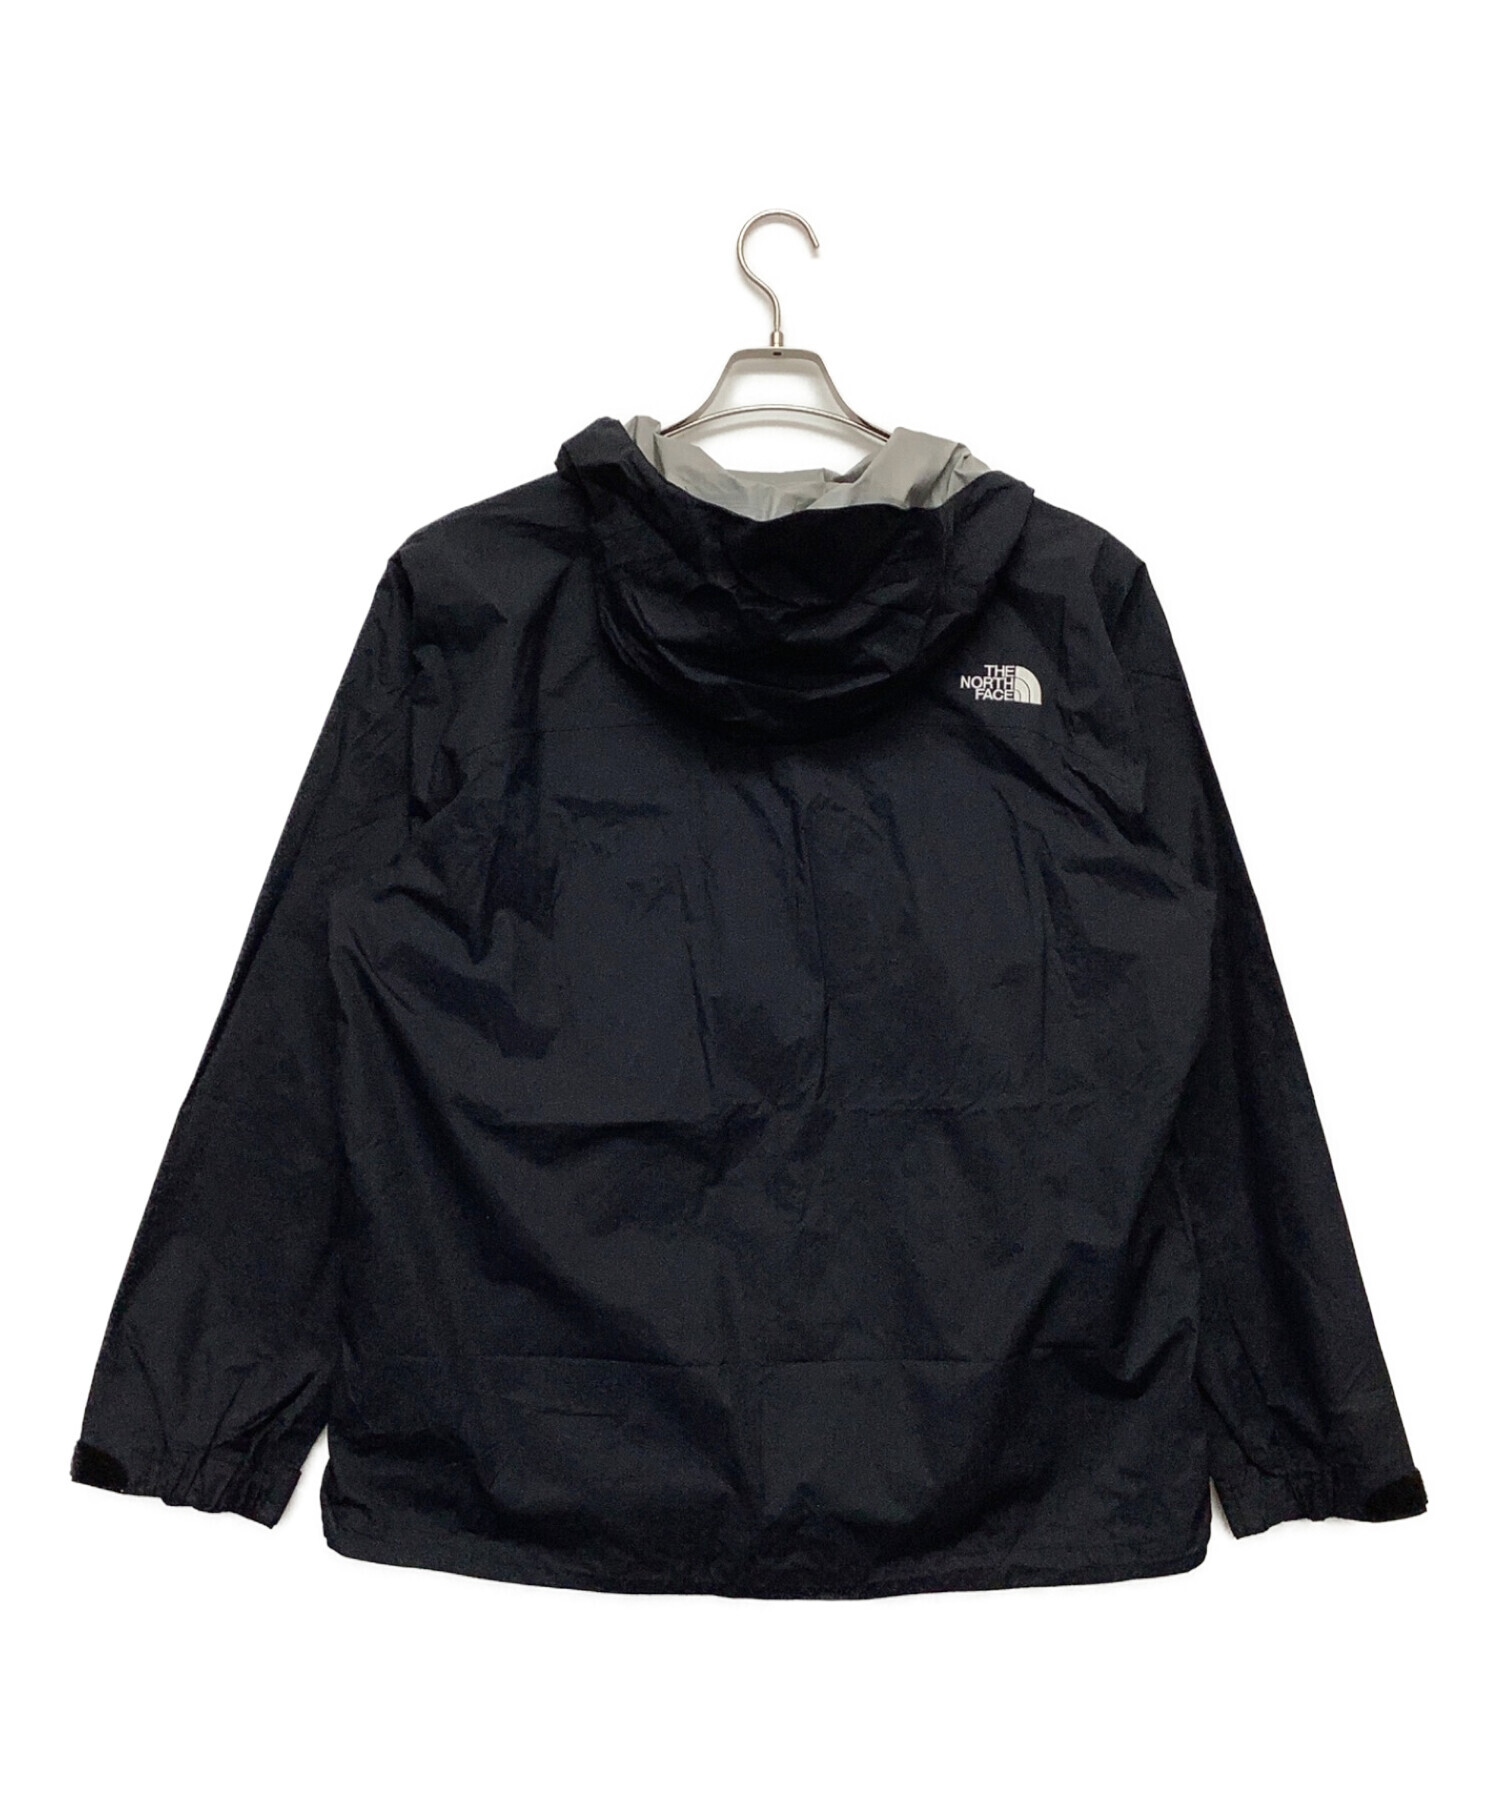 THE NORTH FACE　ナイロンパーカー